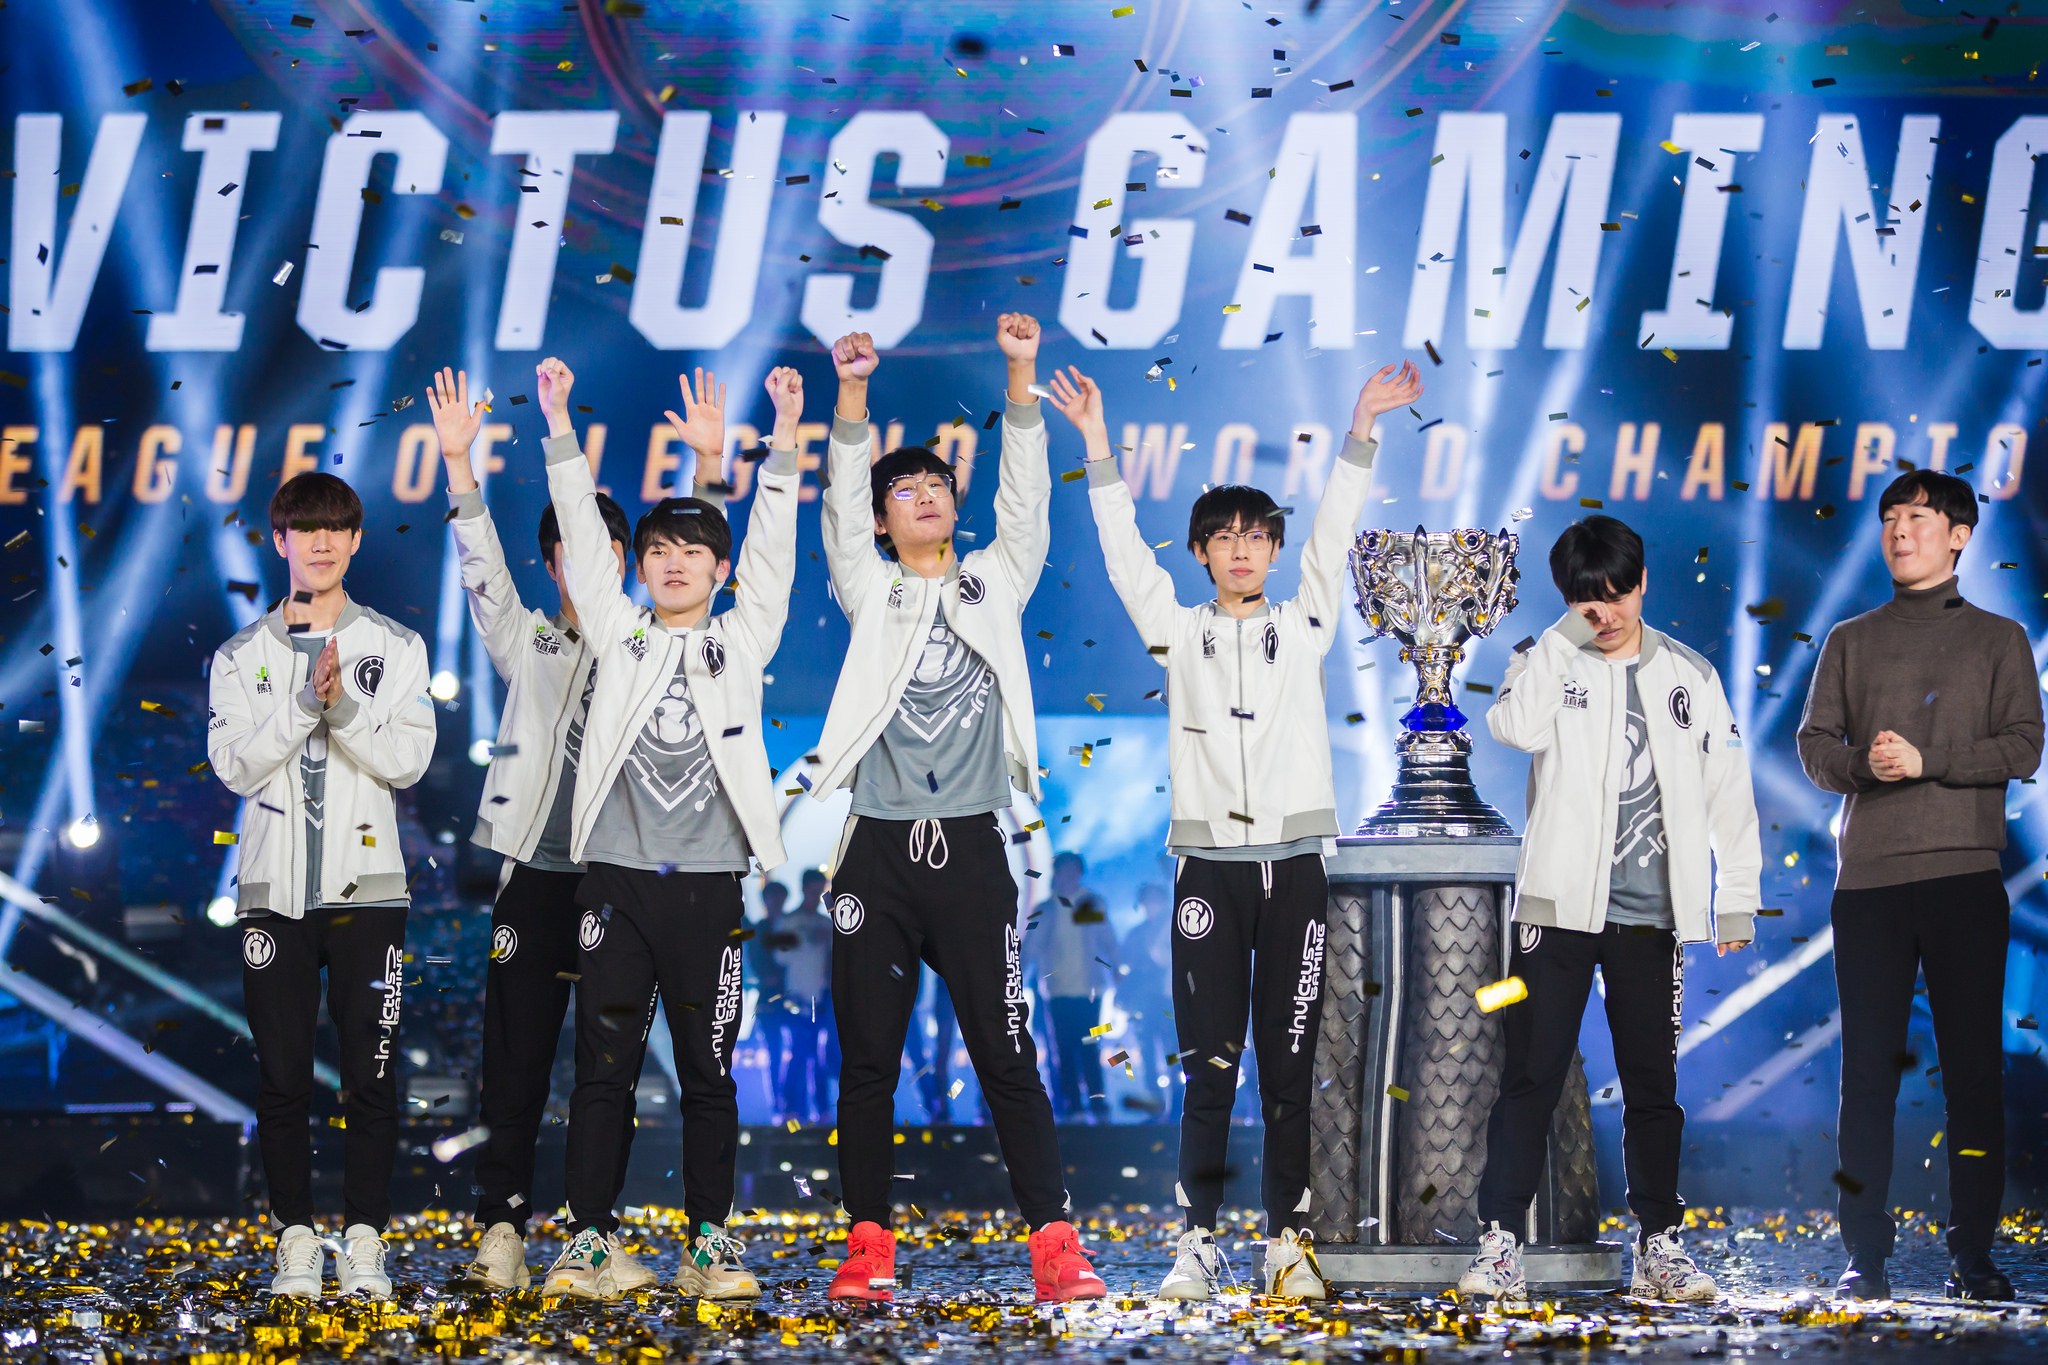 League Of Legends - Invictus Gaming Worlds 2018 , HD Wallpaper & Backgrounds